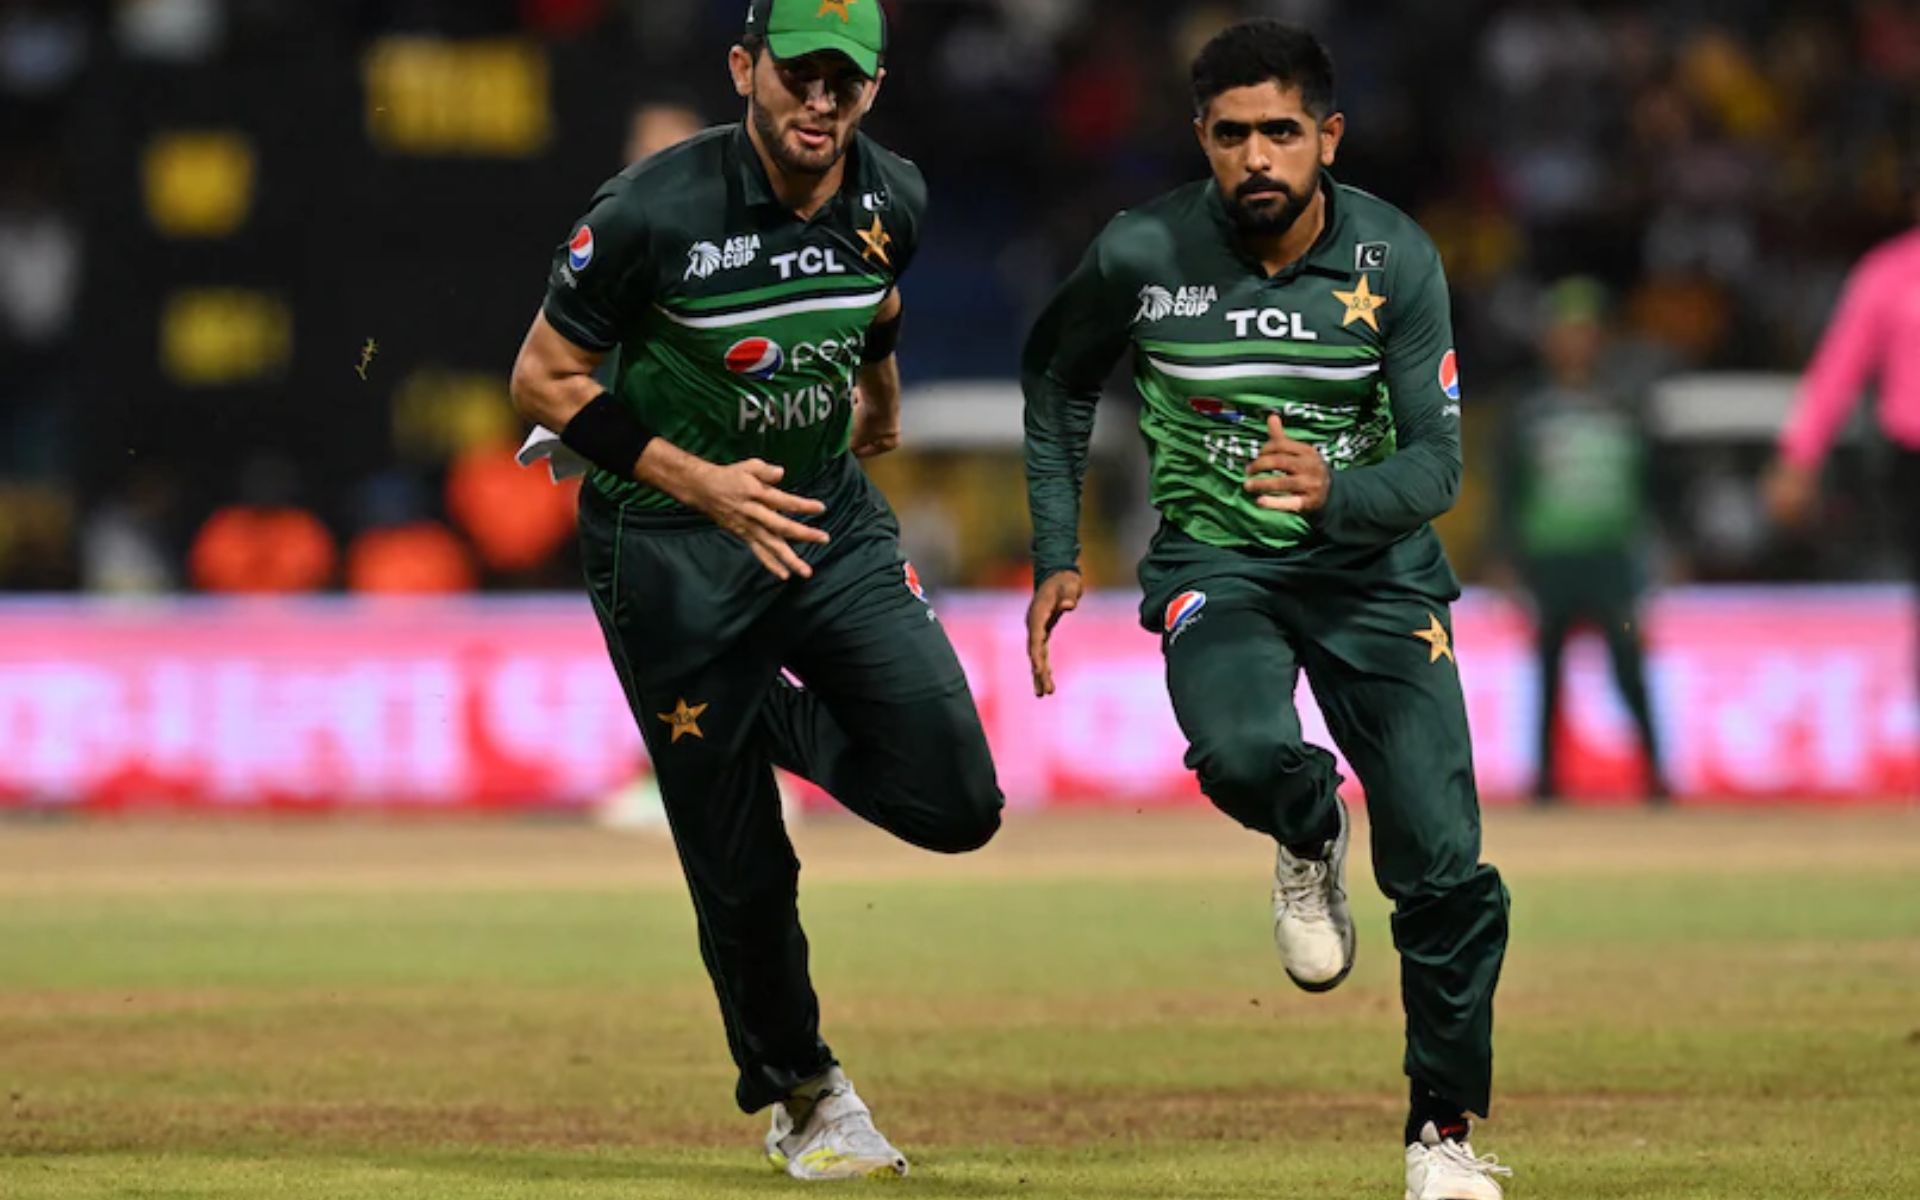 Babar Azam, Shaheen Afridi Not To Receive Pay Cut; Change In Rules Of Central Contract For PAK Players